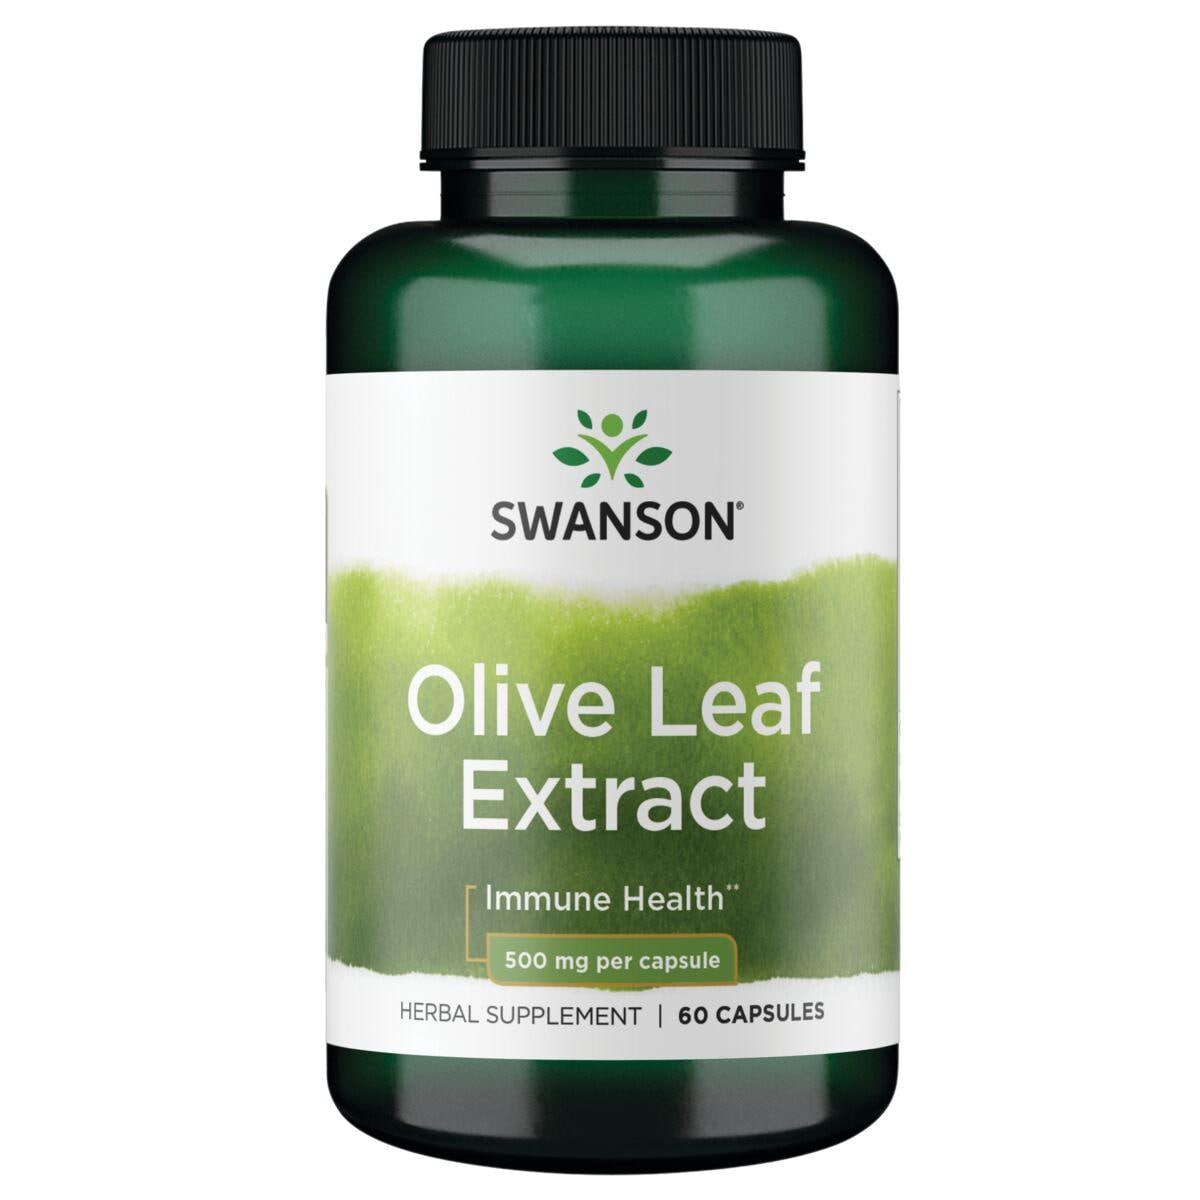 Swanson Superior Herbs Olive Leaf Extract Vitamin | 500 mg | 60 Caps